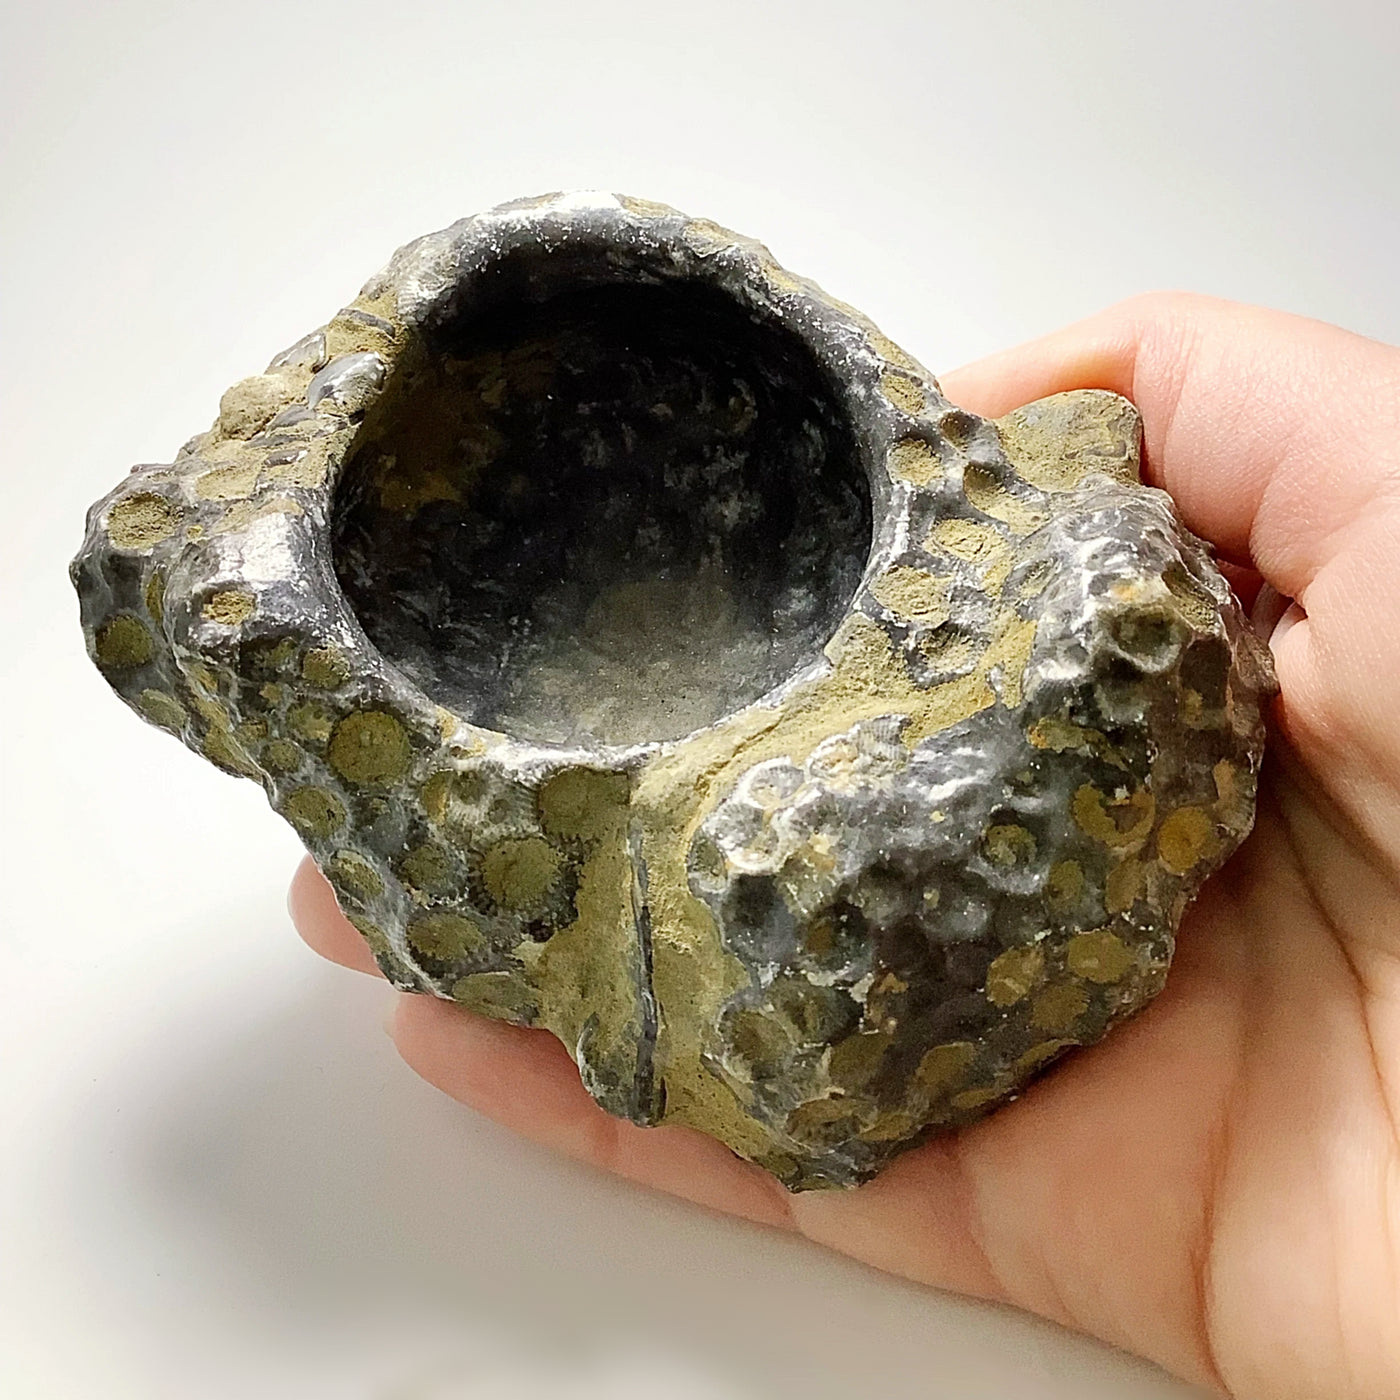 Fossilized Coral Bowl at $59 Each